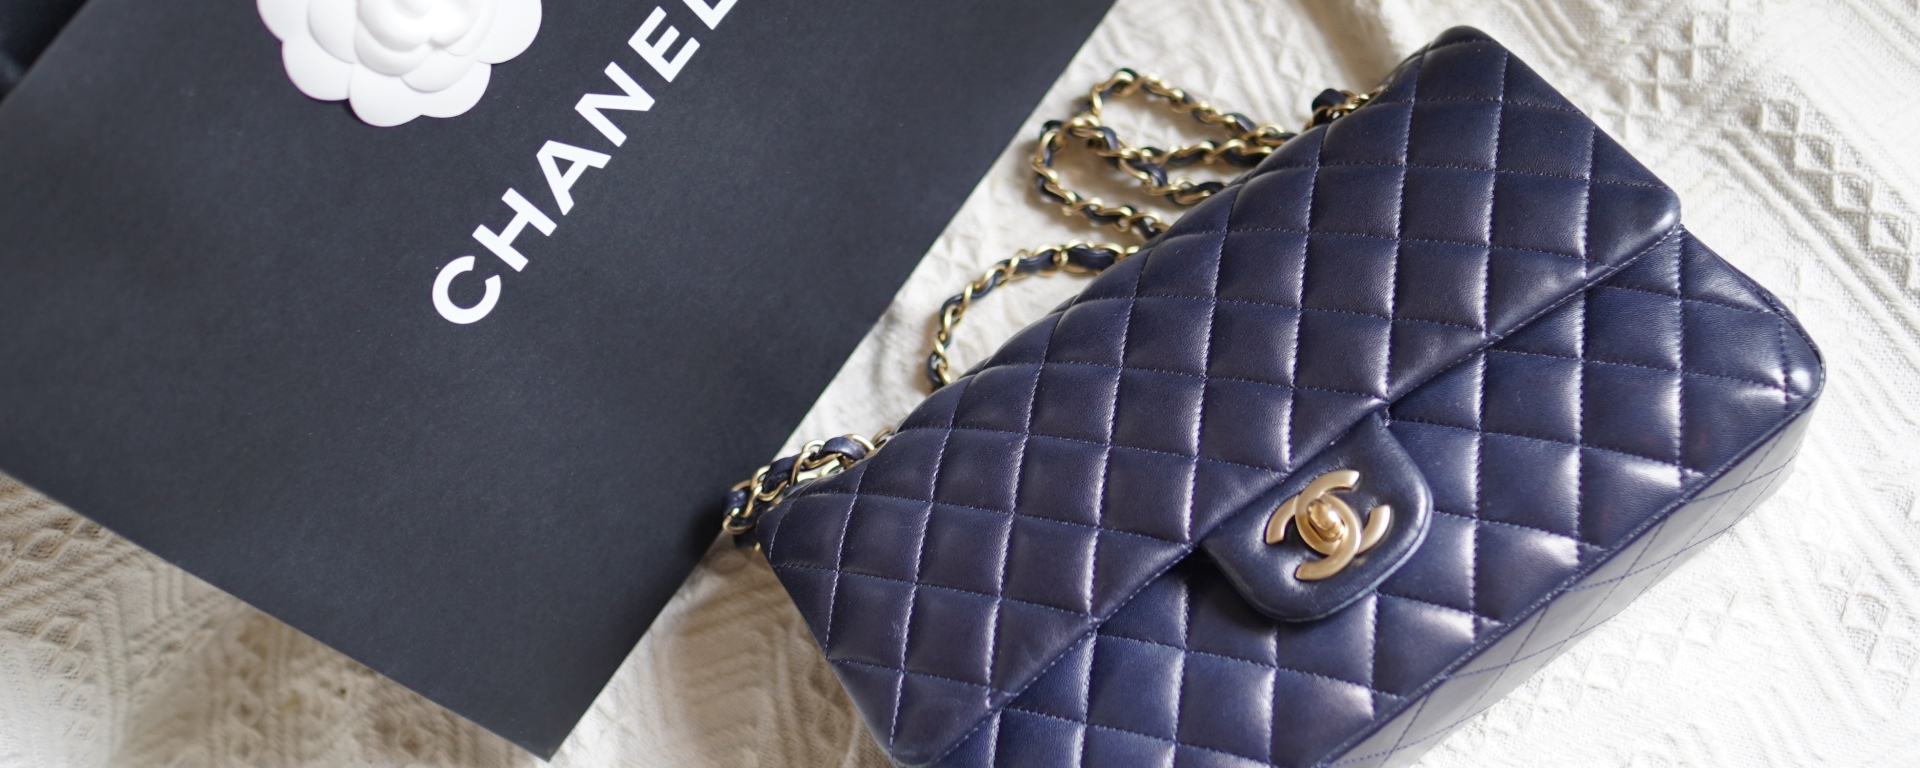 Chanel classic flap bag in midnight blue review & what's in my bag – Follow  Meesh